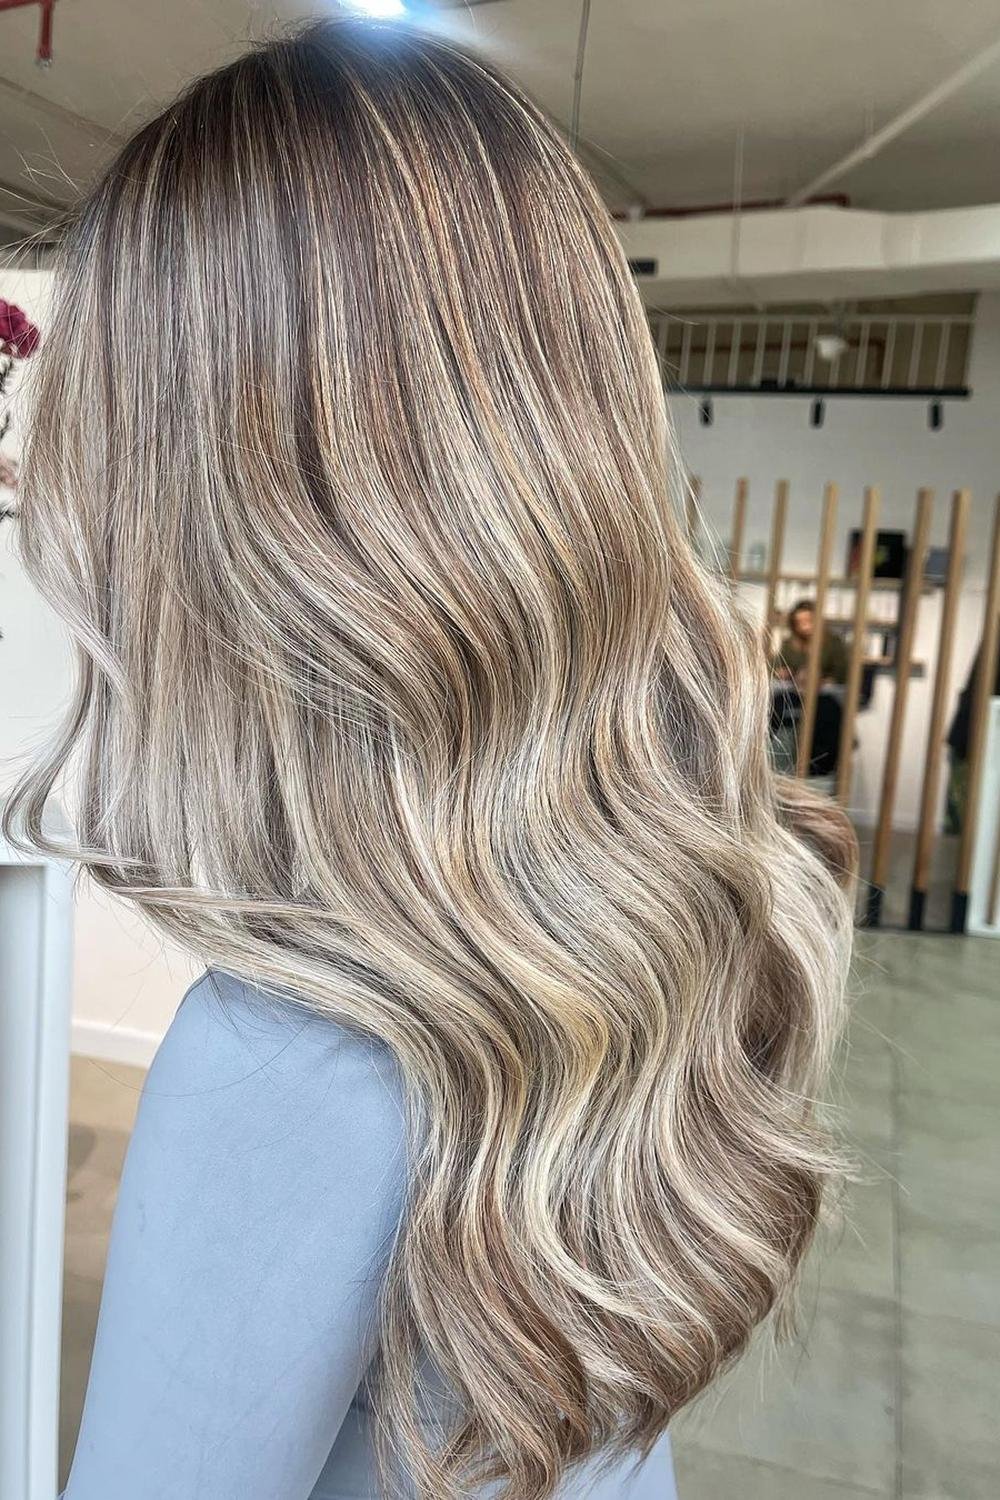 10 - Picture of Balayage Hairstyles